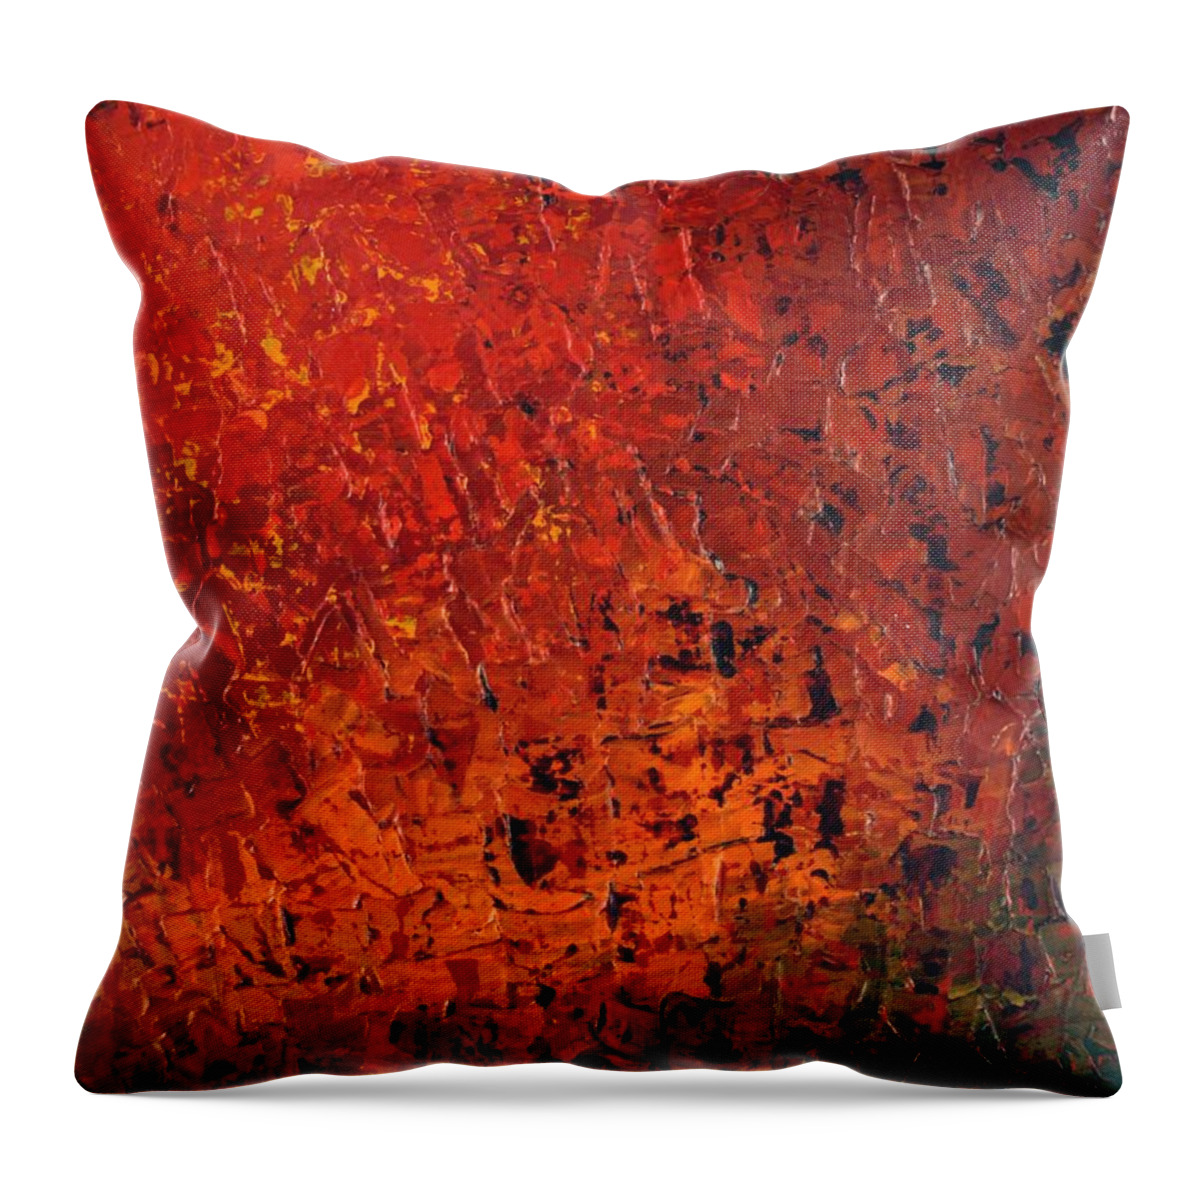 Spicey Throw Pillow featuring the painting Spicey by Linda Bailey